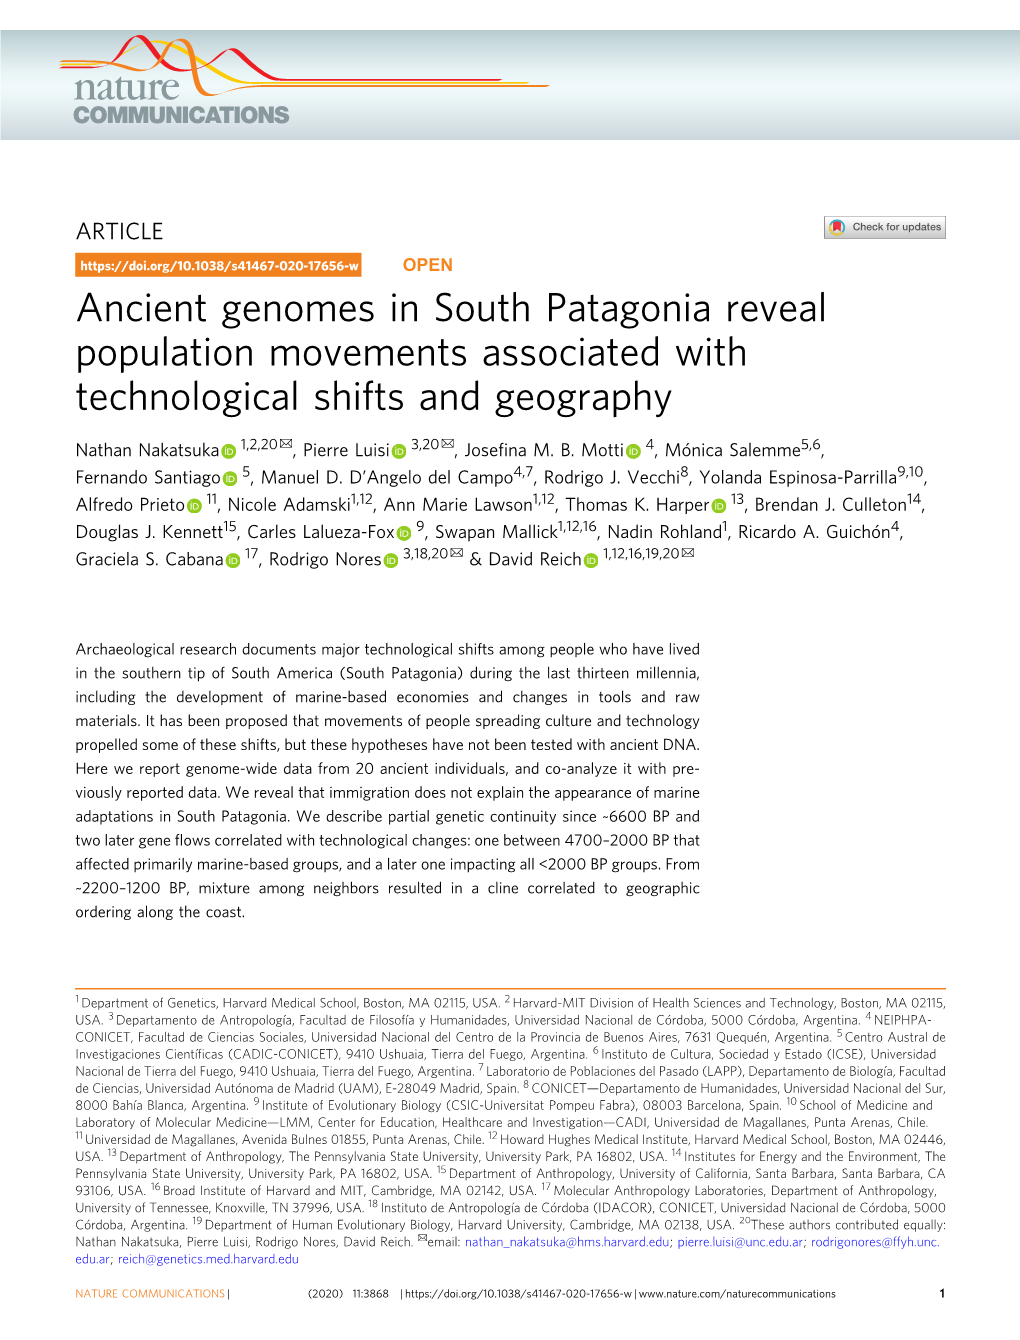 Ancient Genomes in South Patagonia Reveal Population Movements Associated with Technological Shifts and Geography